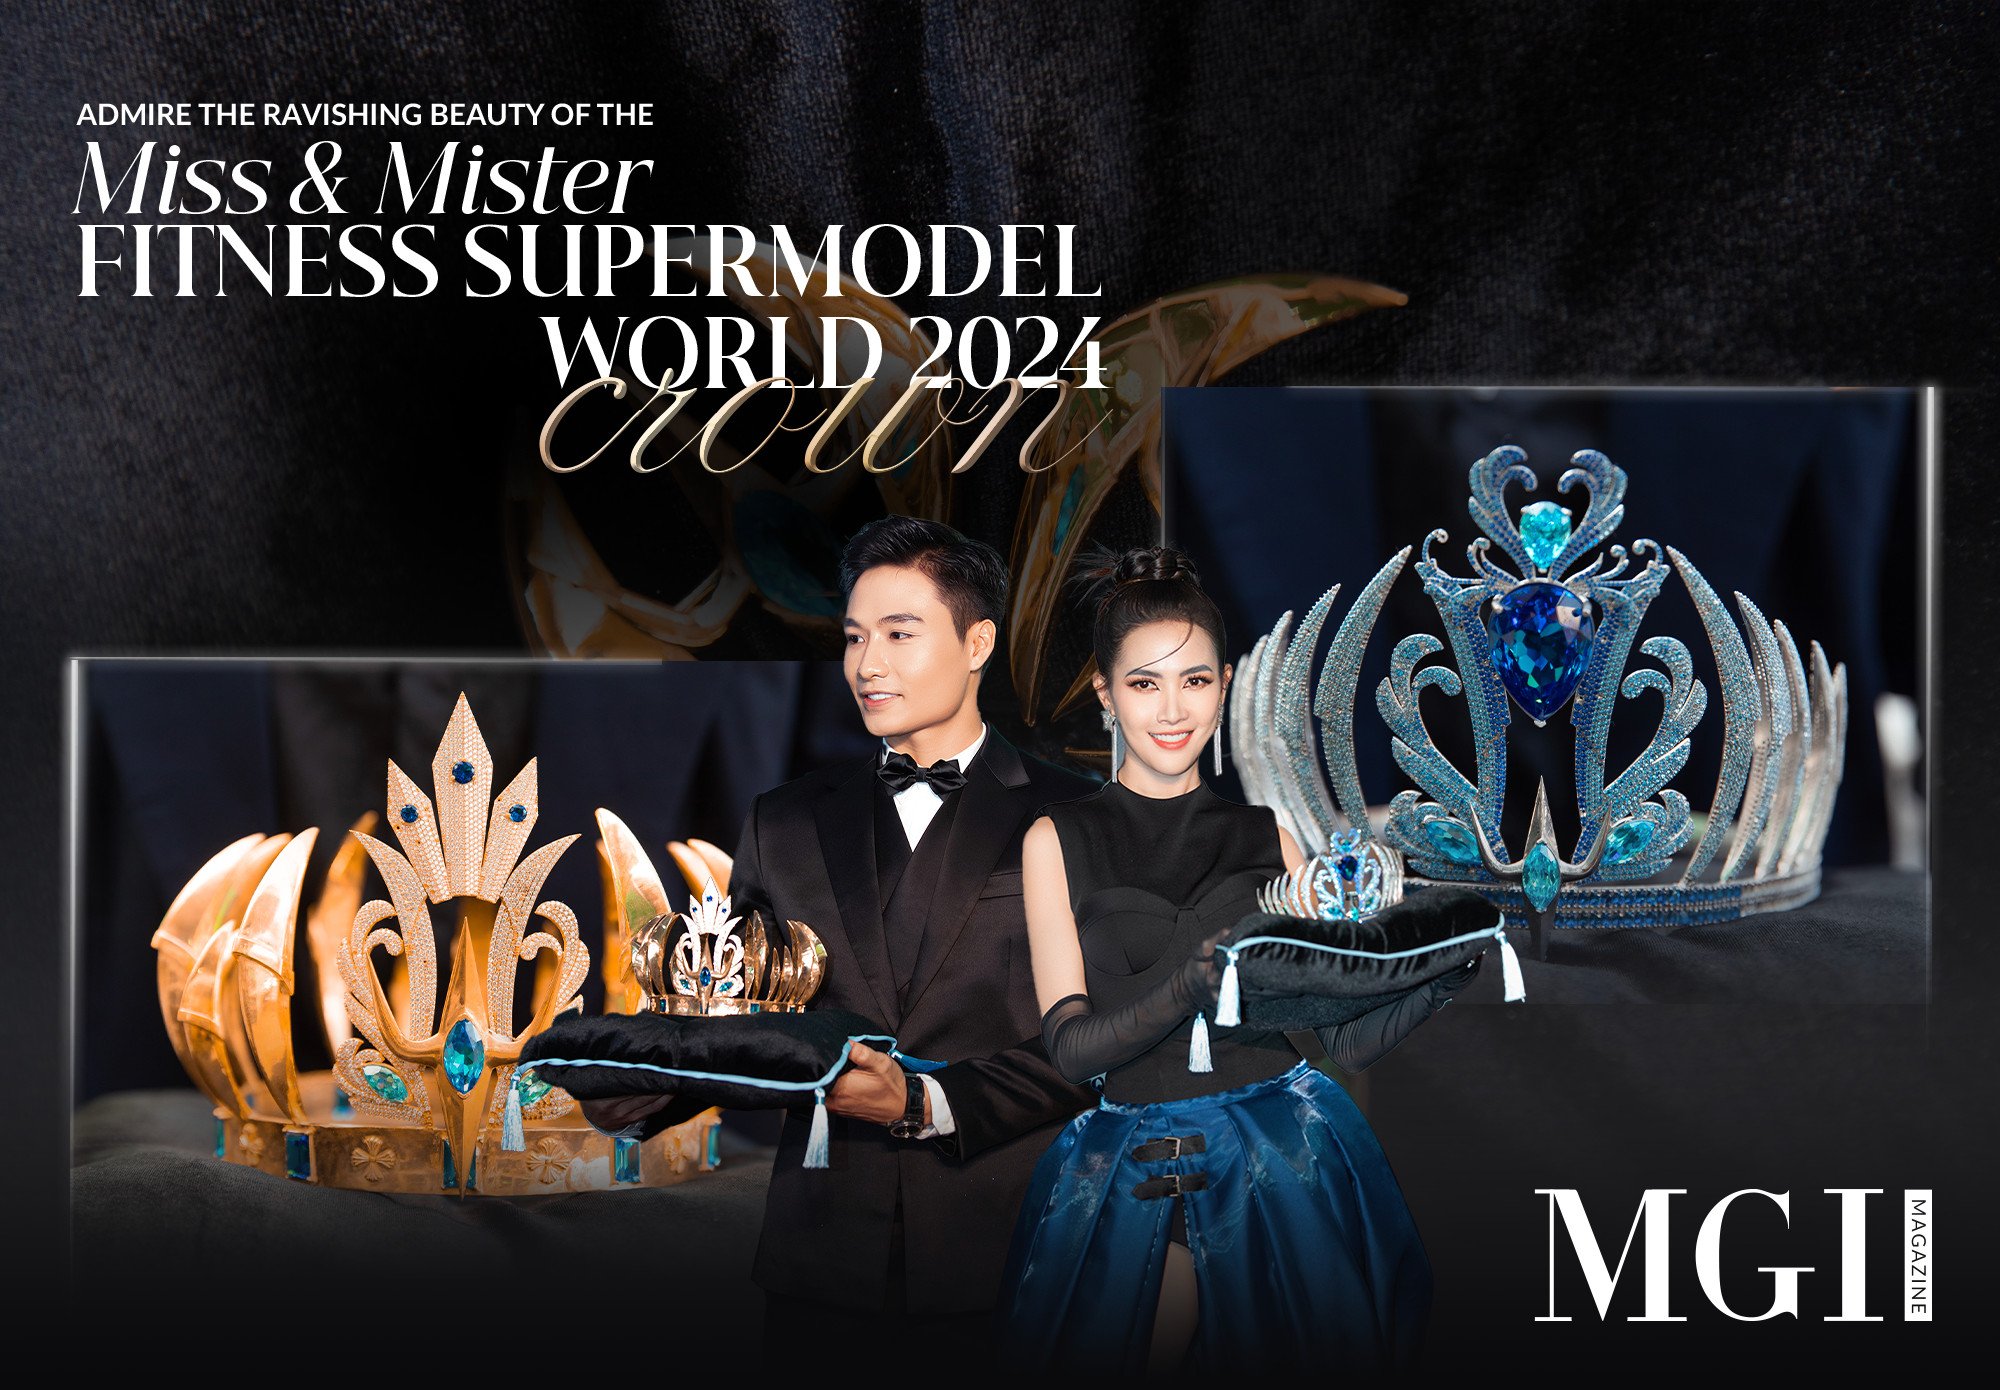 Admire the ravishing beauty of the Miss & Mister Fitness Supermodel World 2024 crown